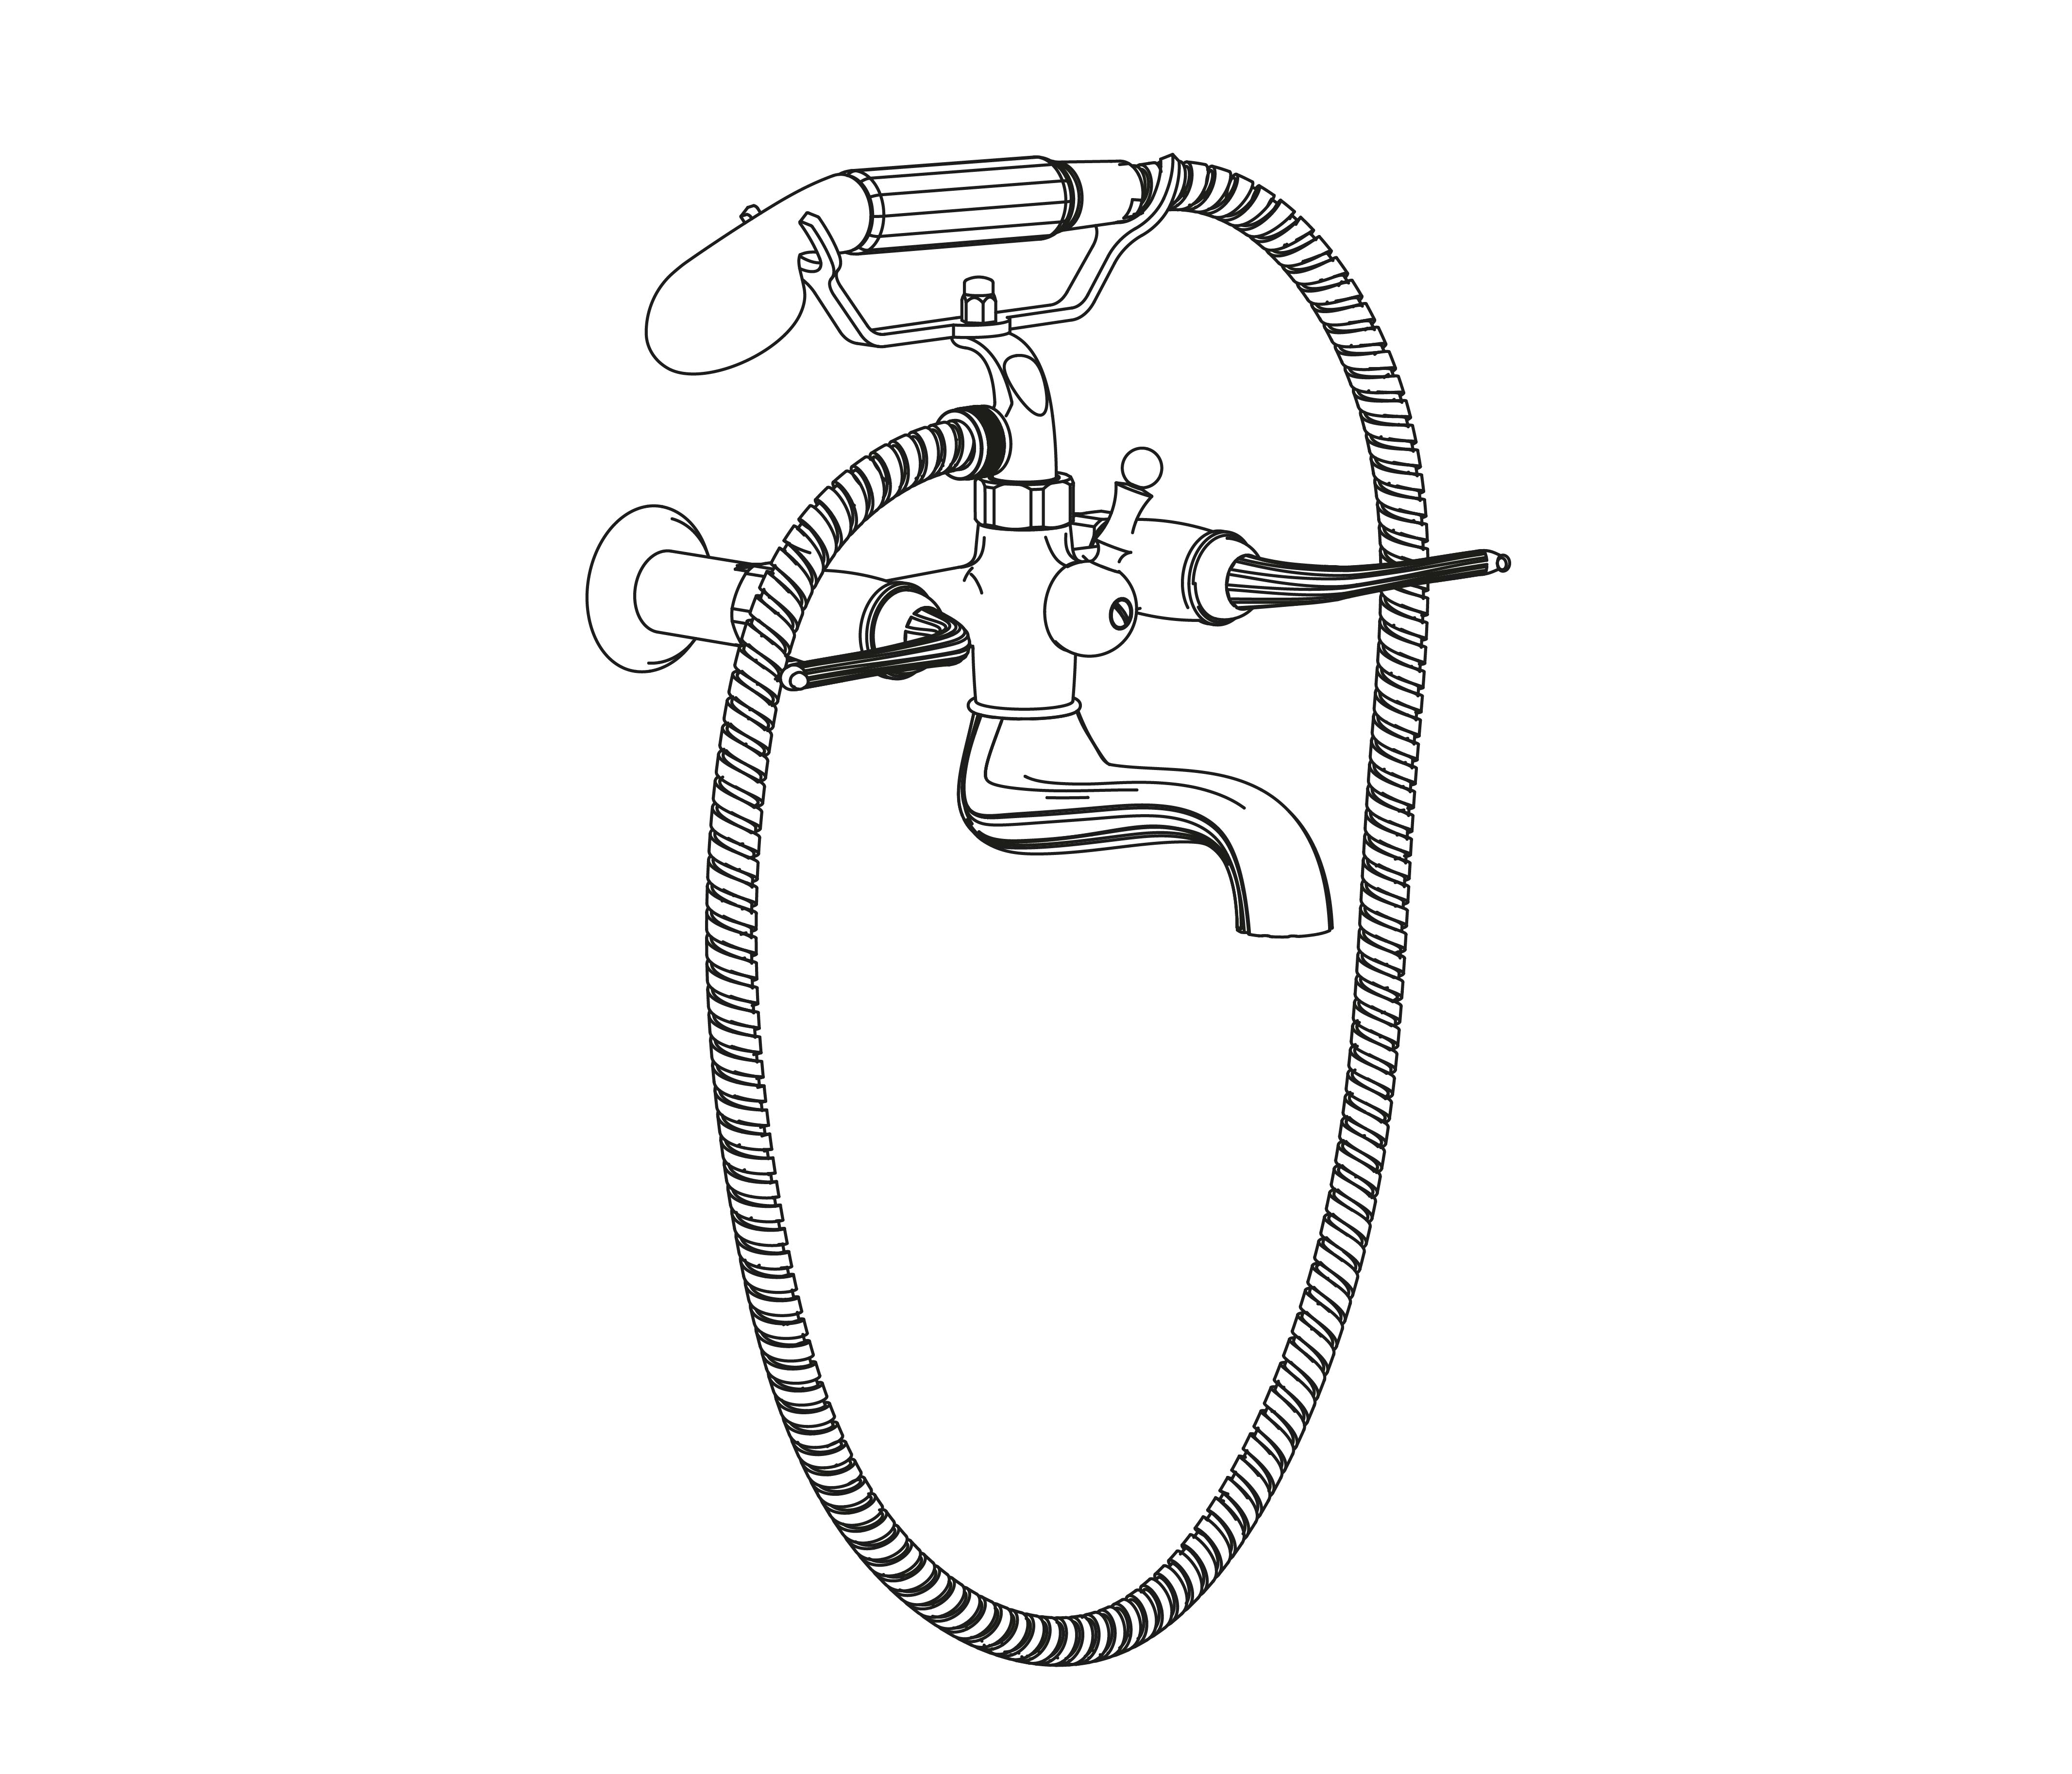 C67-3201 Wall mounted bath and shower mixer